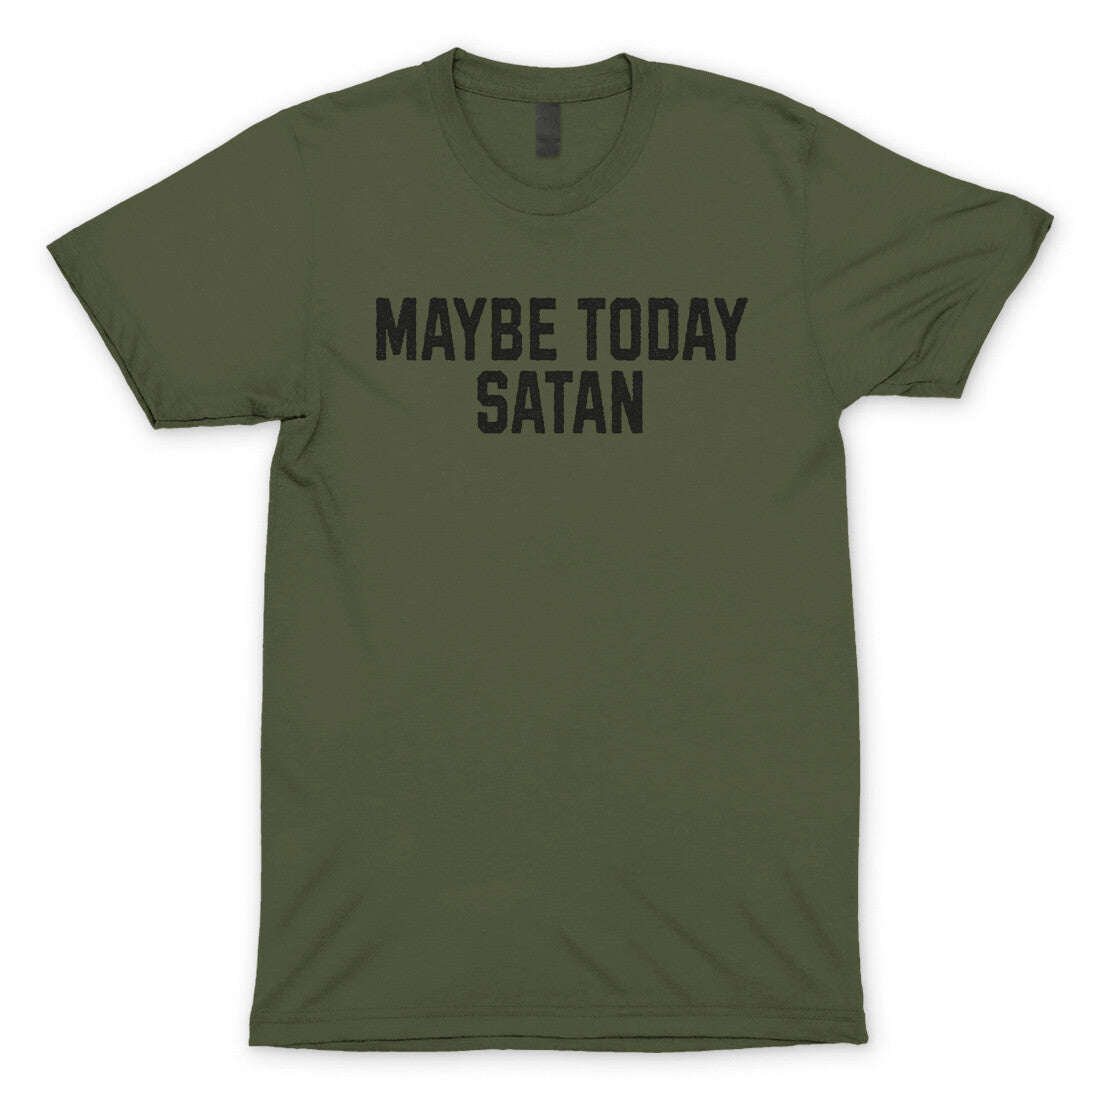 Maybe Today Satan in Military Green Color